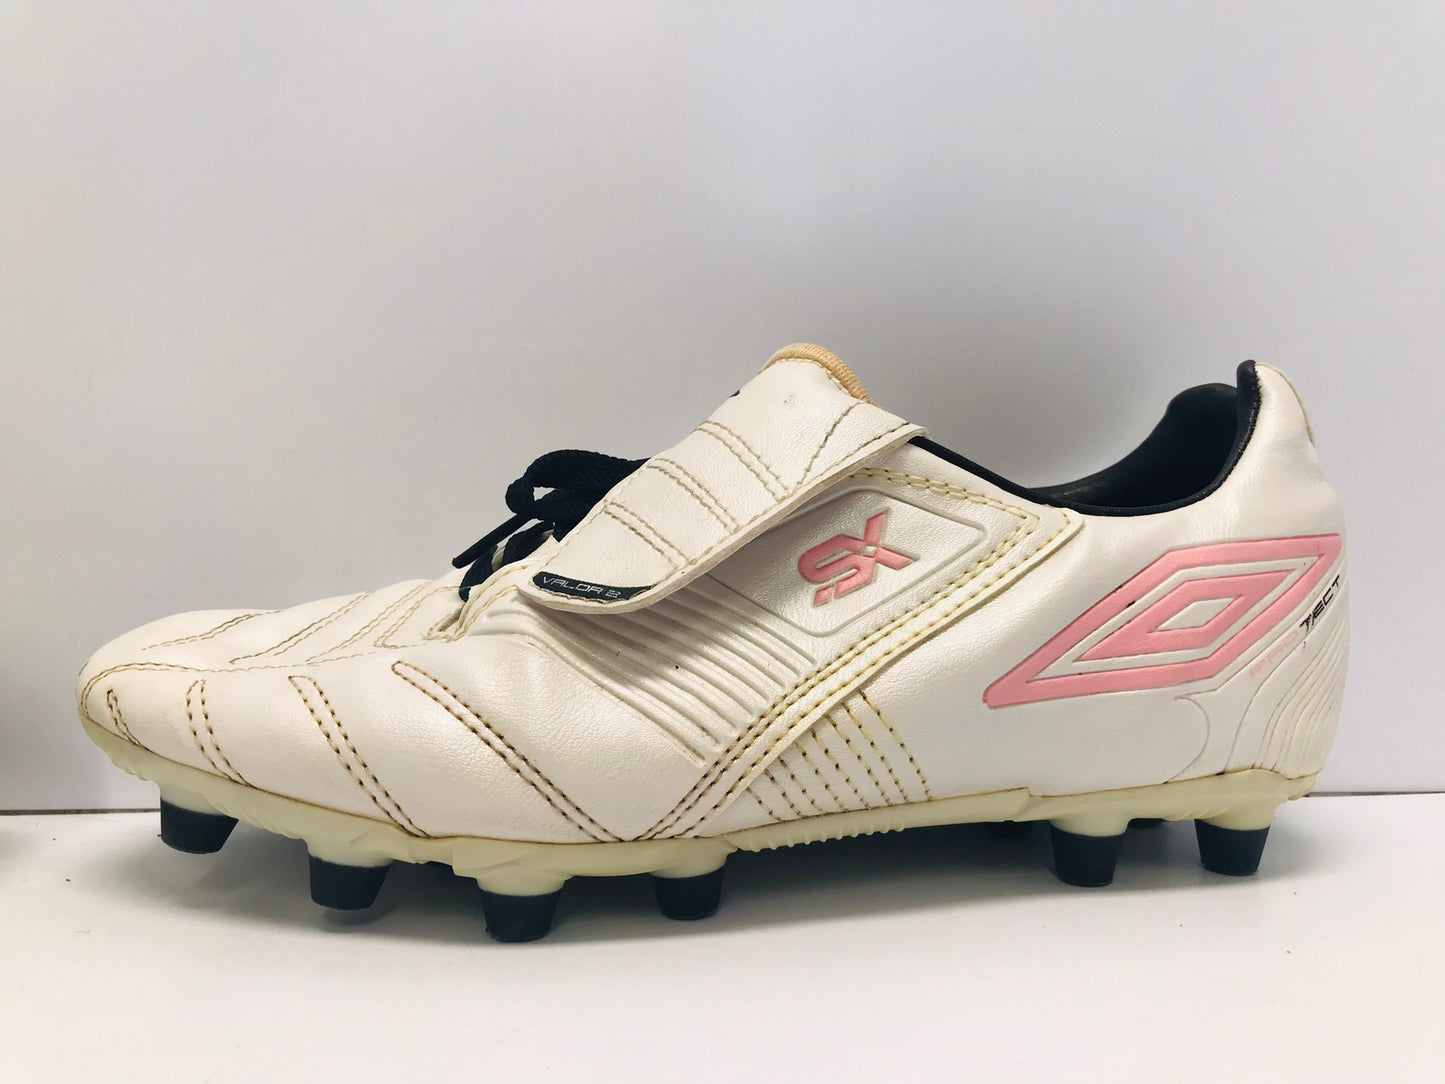 Soccer Shoes Cleats Ladies Size 8.5 Umbro White Pink  Excellent